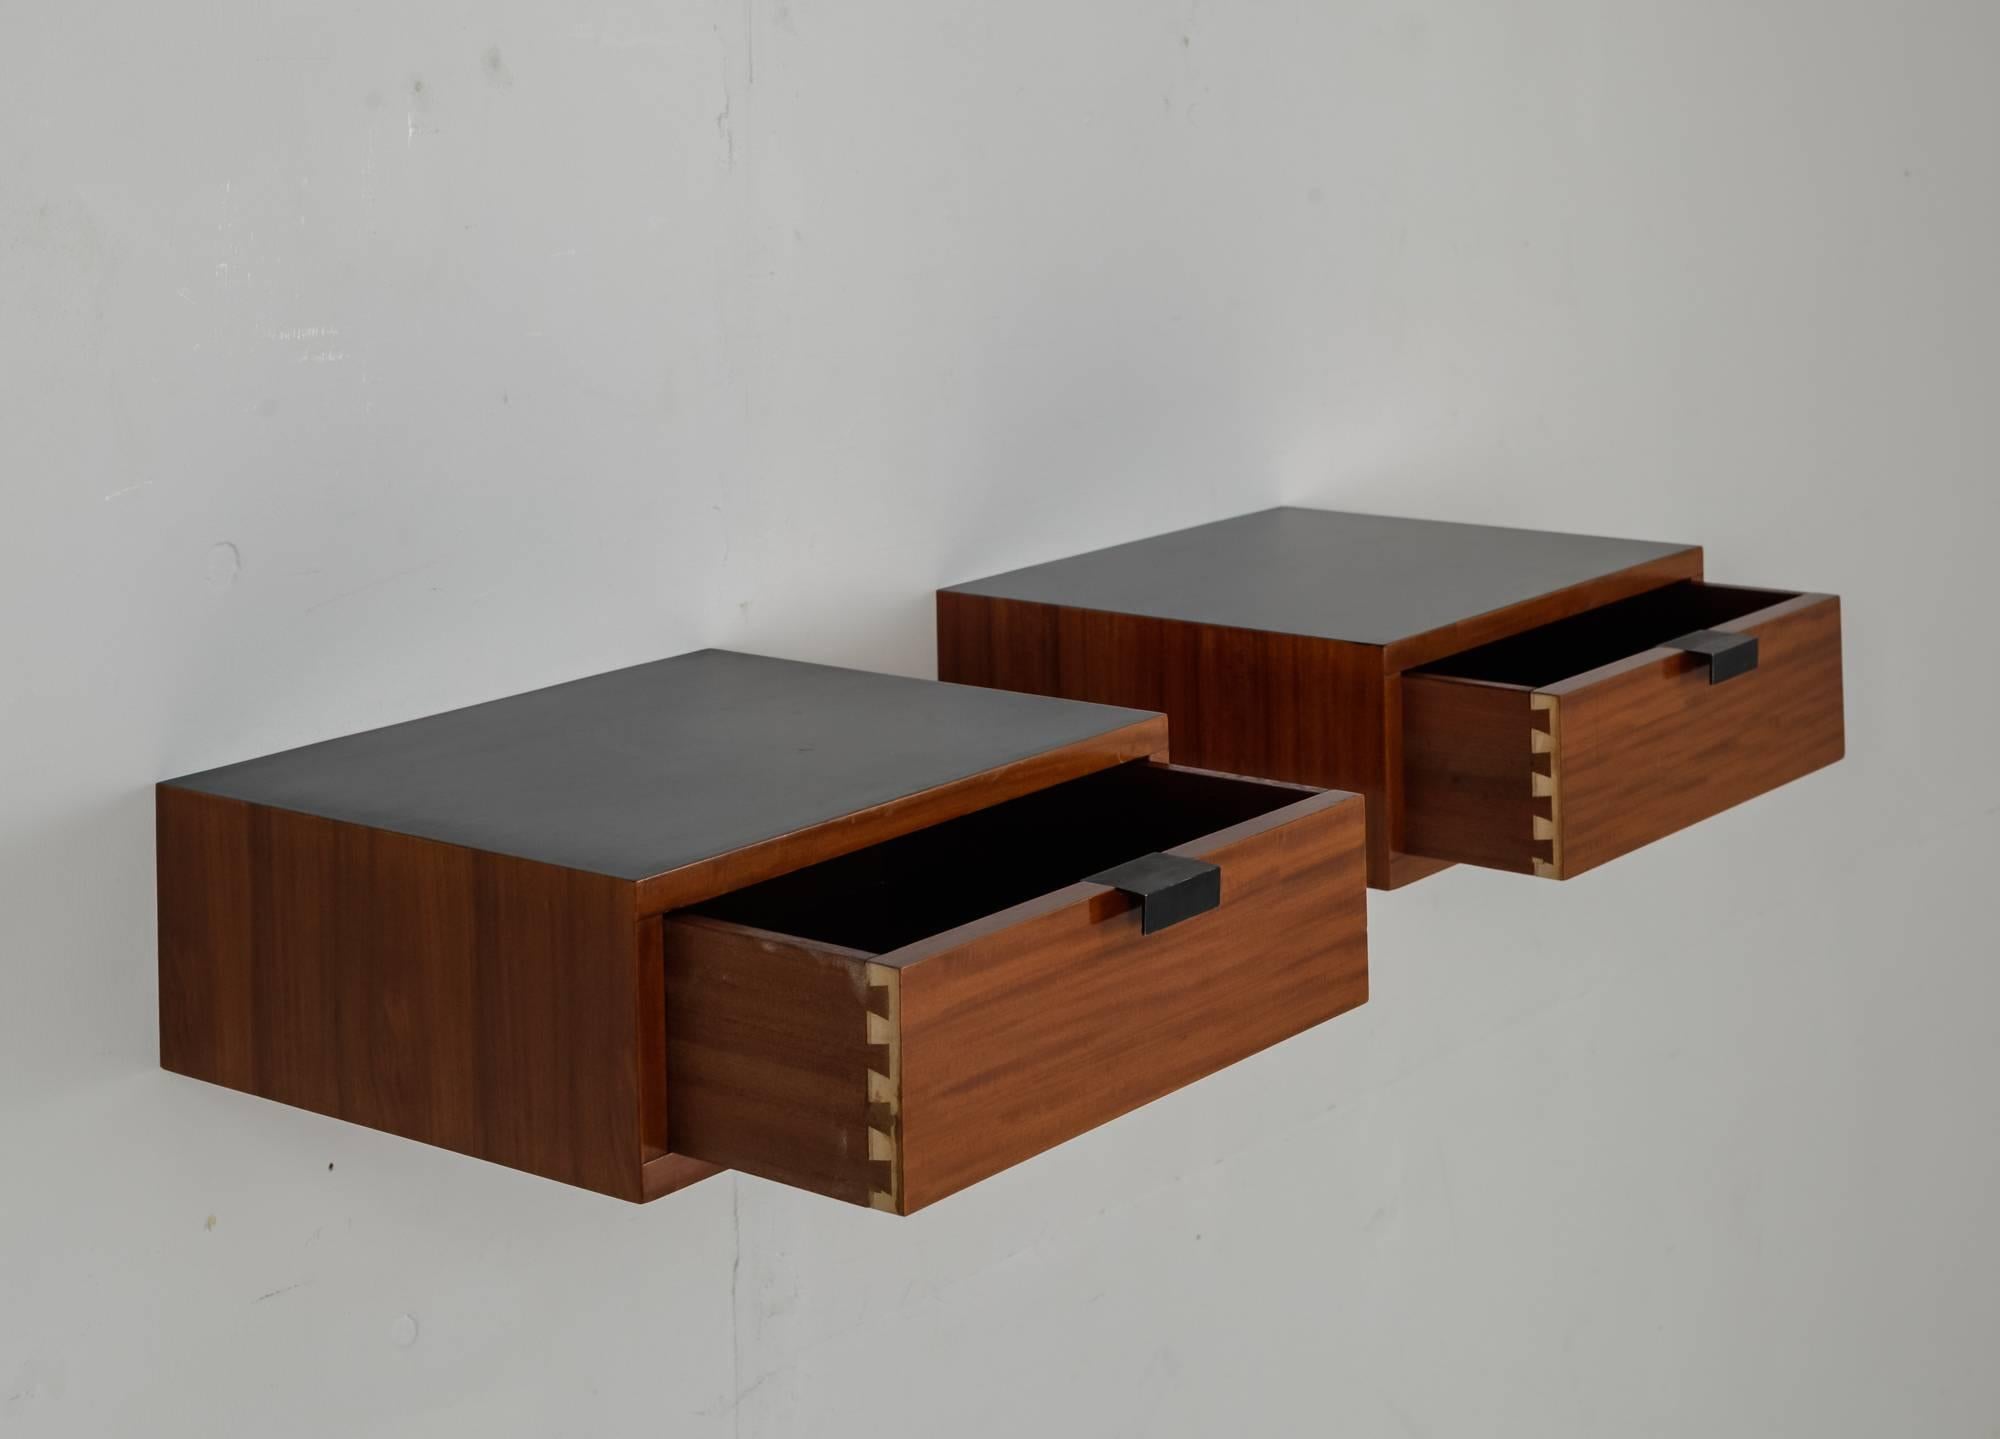 A pair of wall-mounted cabinets with one drawer, designed by Pierre Paulin for Thonet. These pieces are made of wood with a black lacquered top and metal pulls.